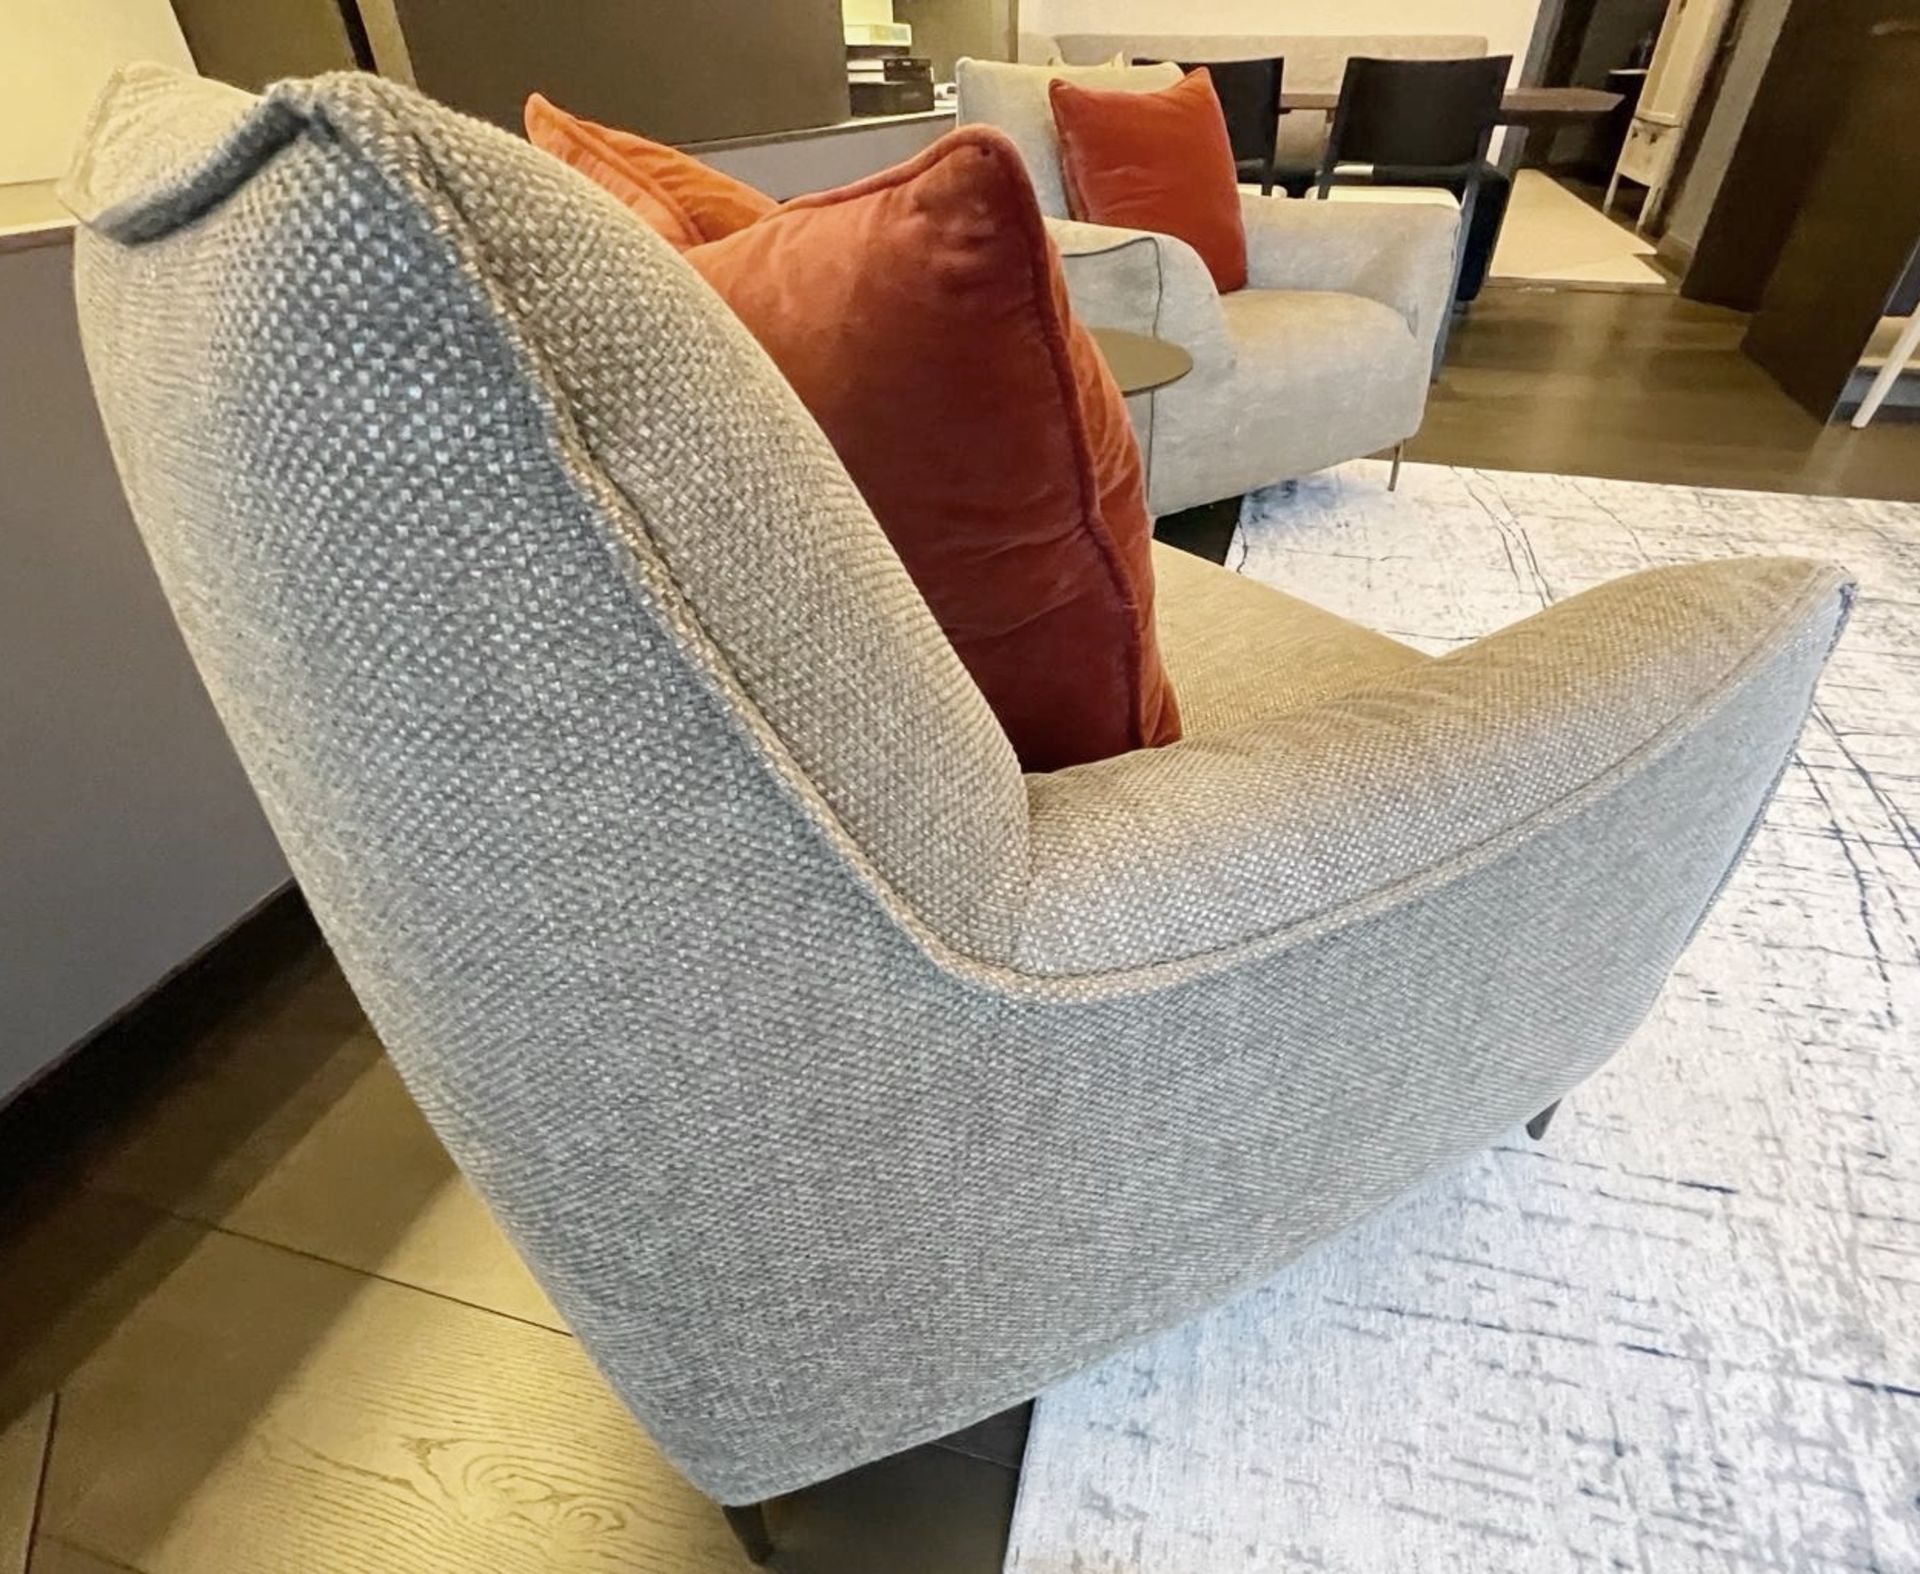 Pair of NATUZZI Luxury Armchairs Generously Upholstered in a Premium Woven Beige Fabric - Image 4 of 10